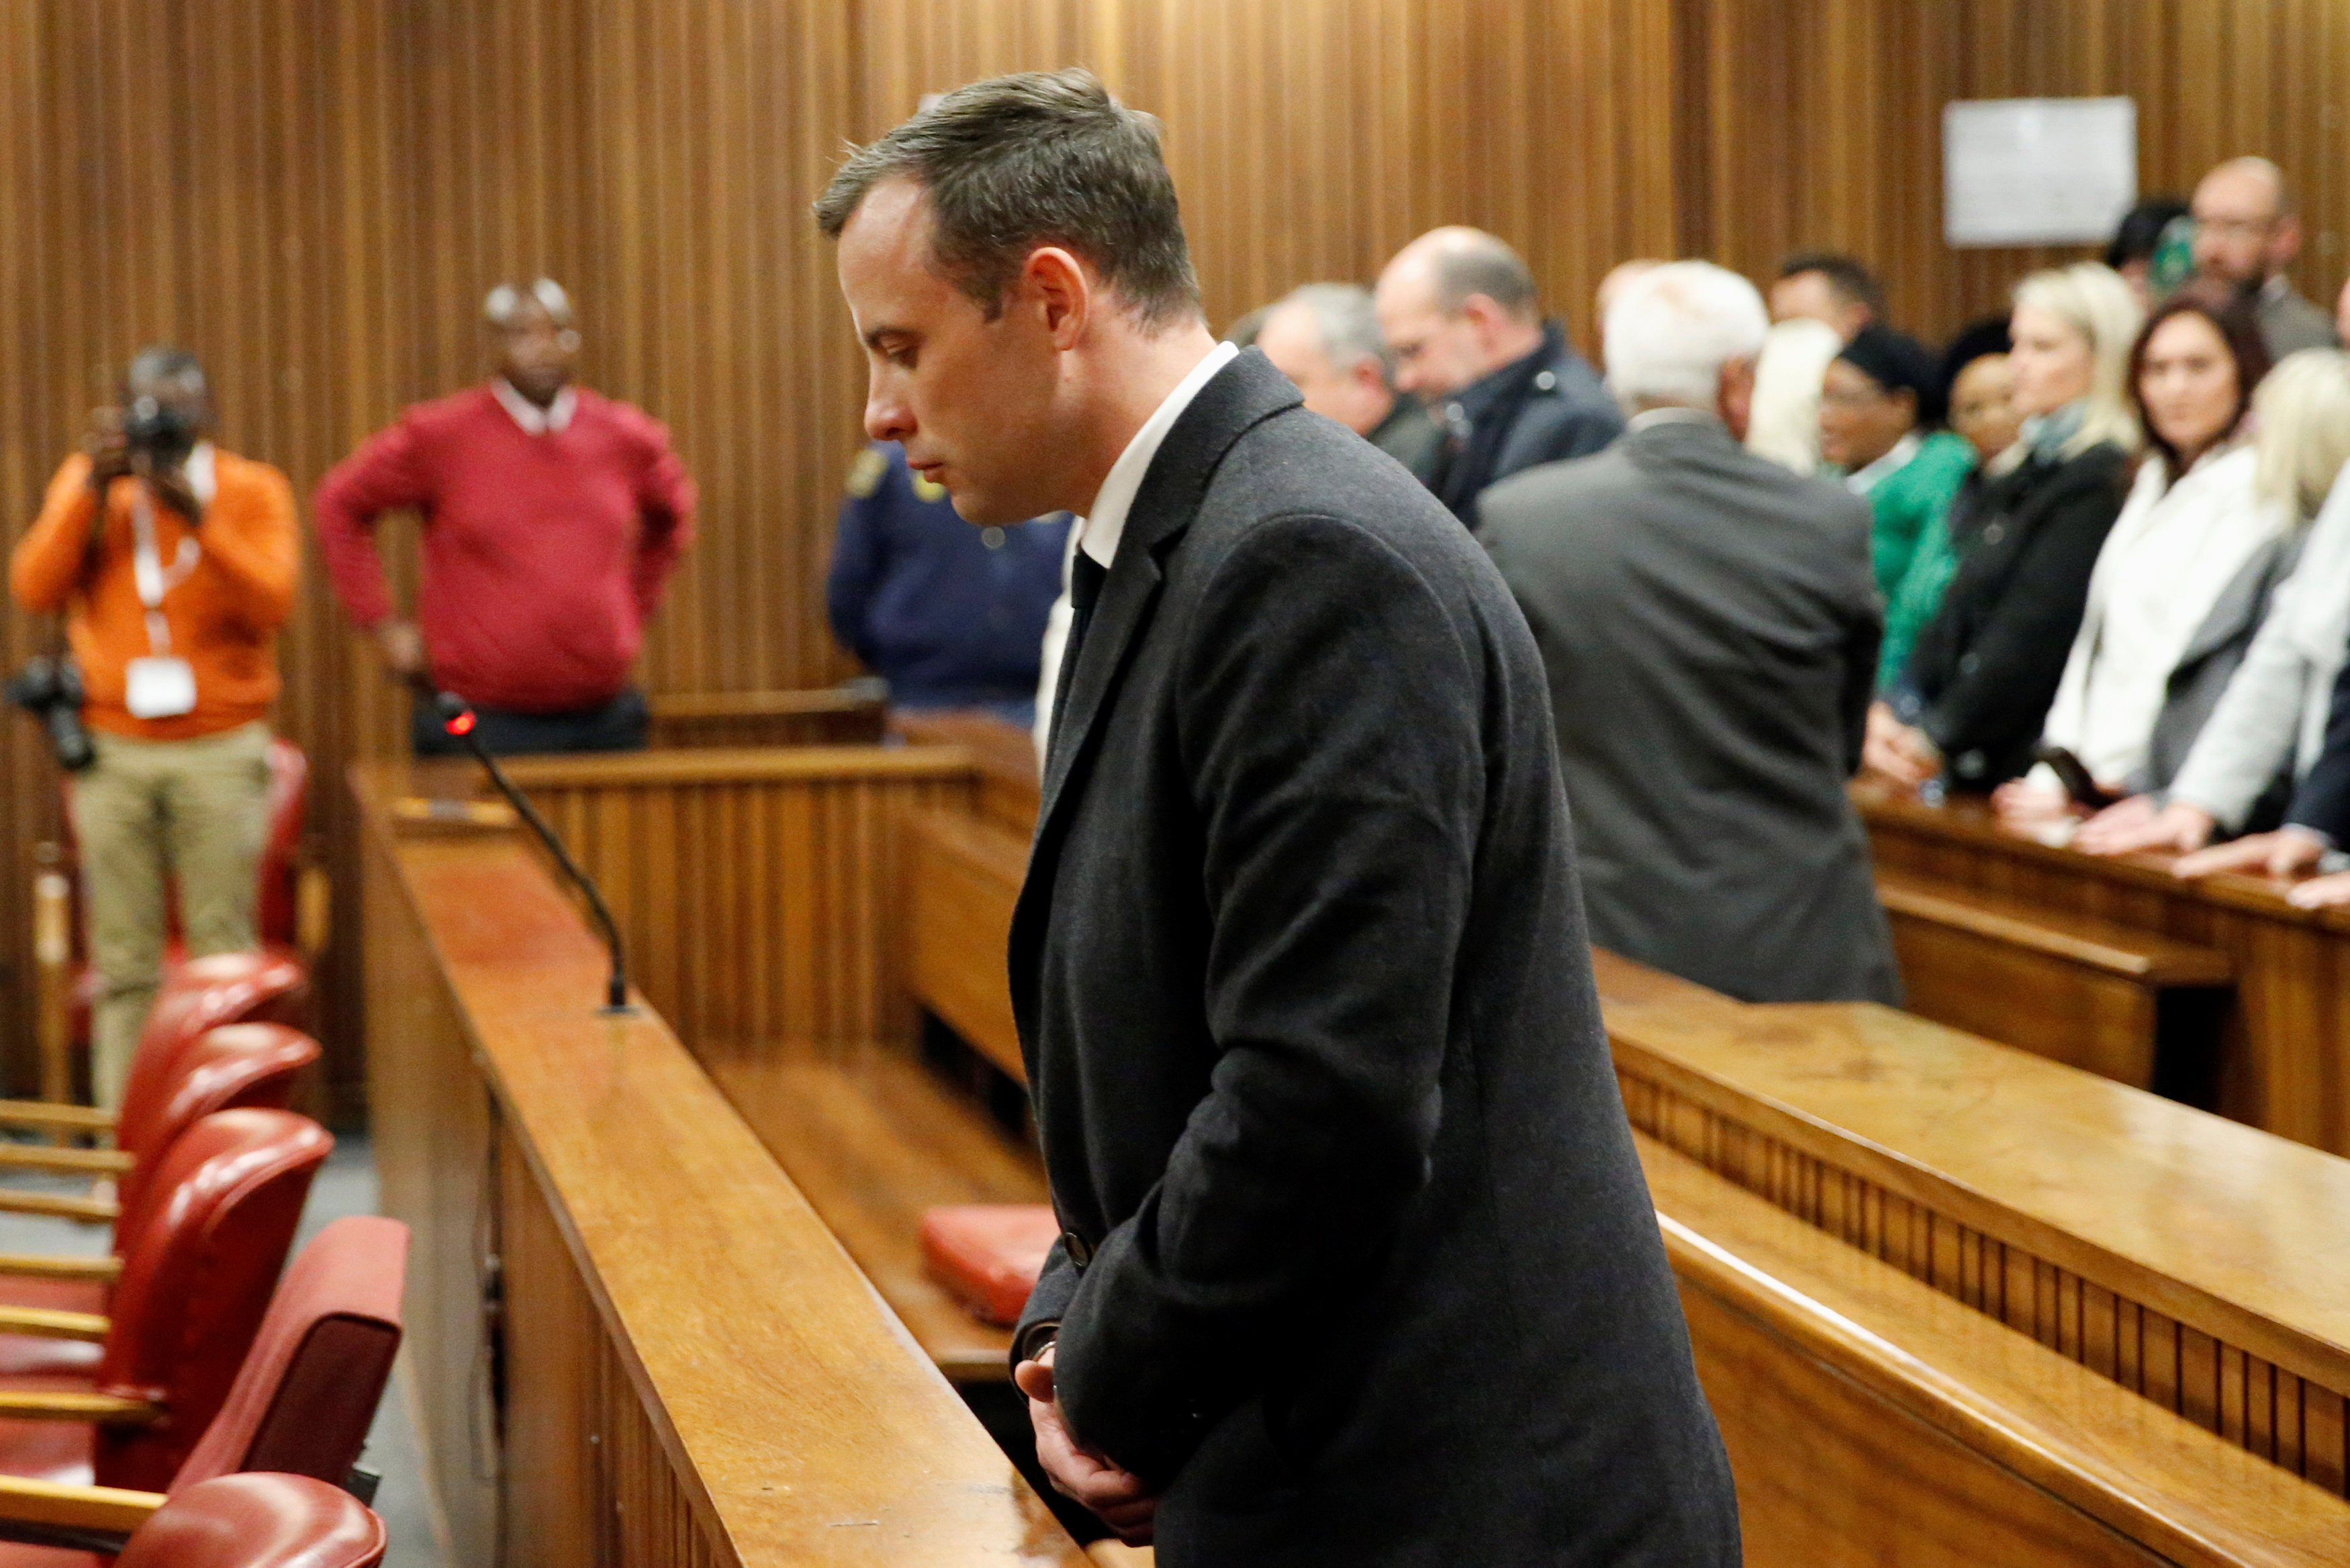 Olympic and Paralympic track star Oscar Pistorius reacts at his sentence hearing at the North Gauteng High Court in Pretoria, South Africa, July 6, 2016. REUTERS/Marco Longari/Pool